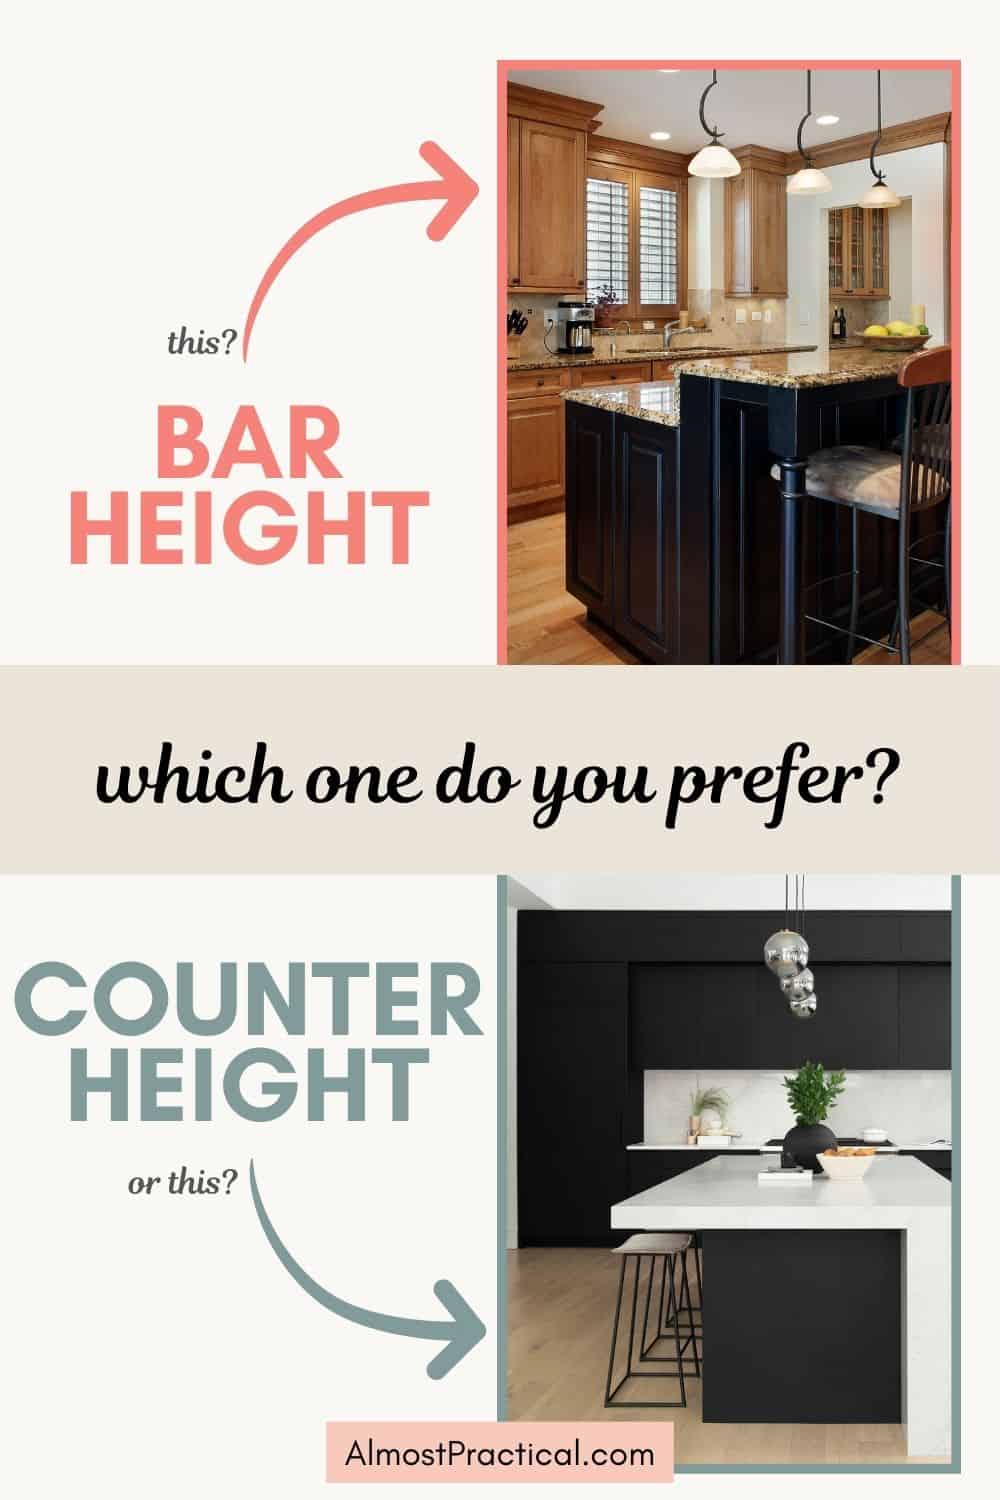 two images - top is bar height countertops and bottom is counter height counter tops